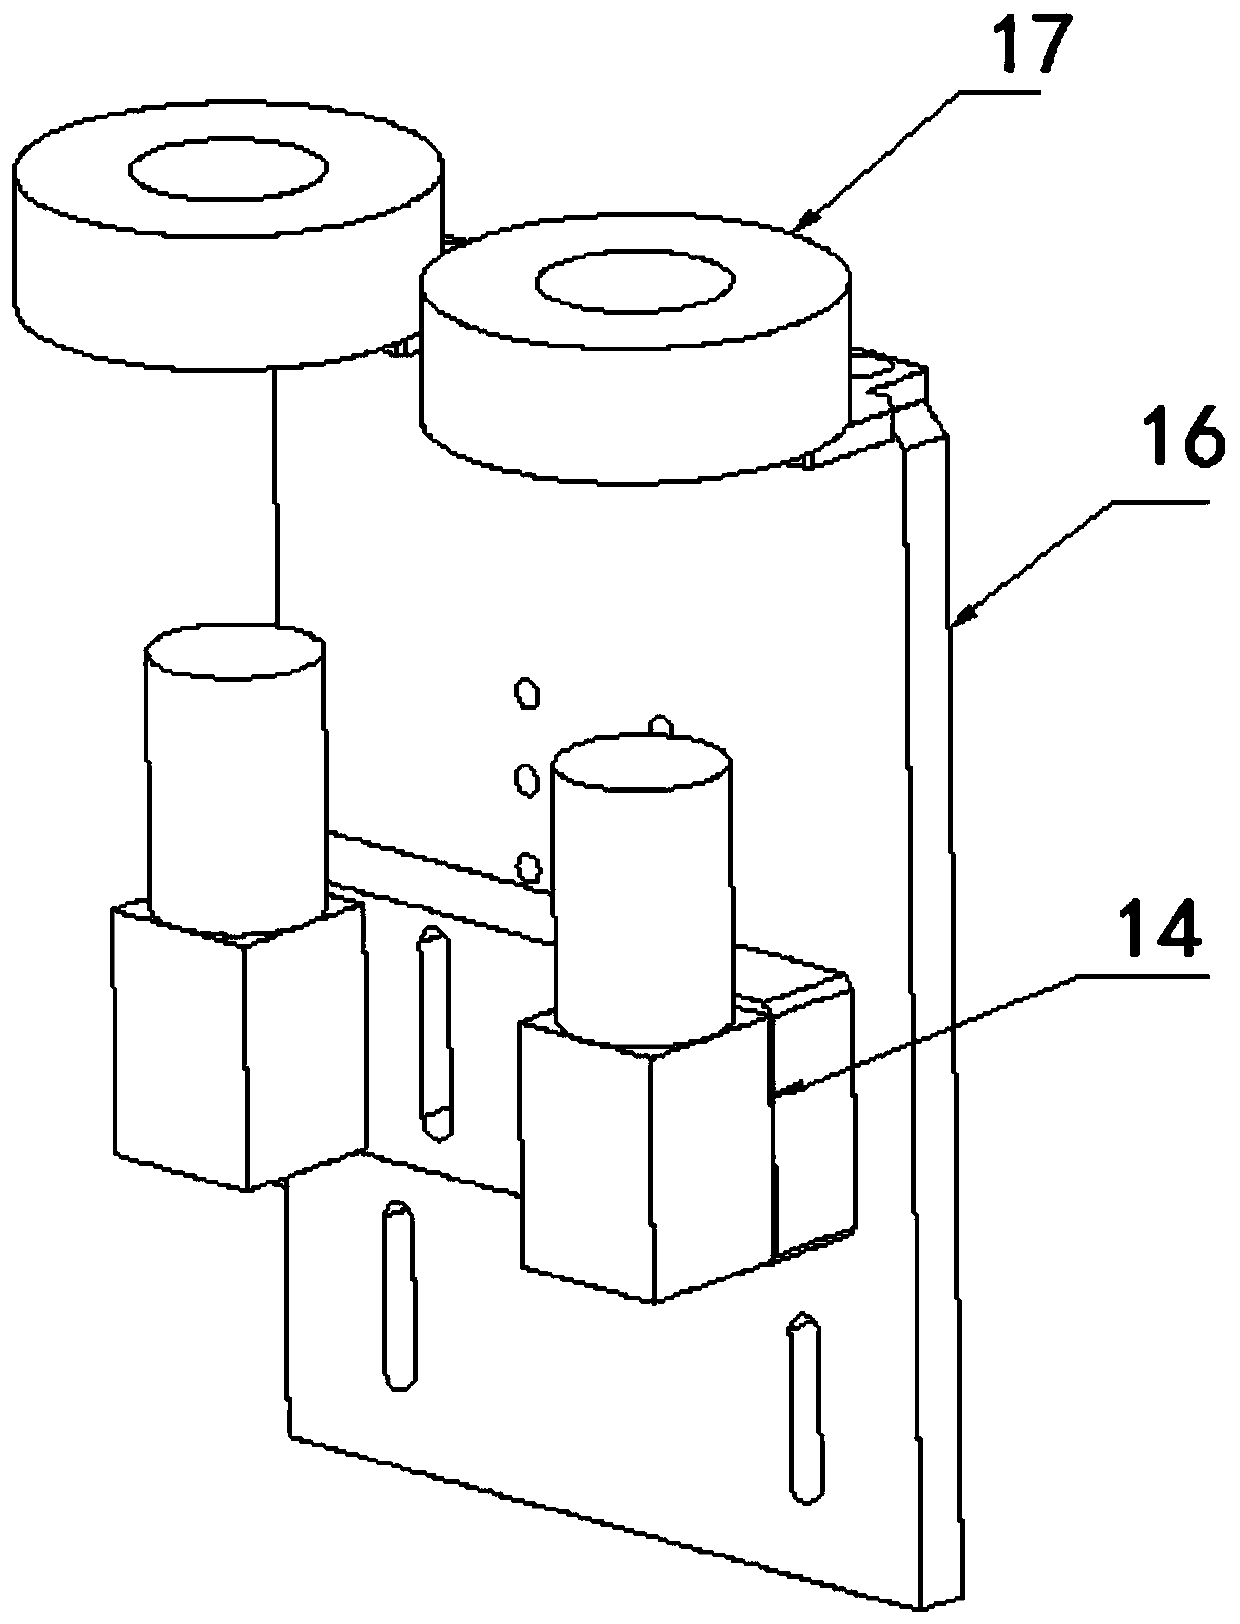 Visual aligning and blocking device for blocking slots in wine covers